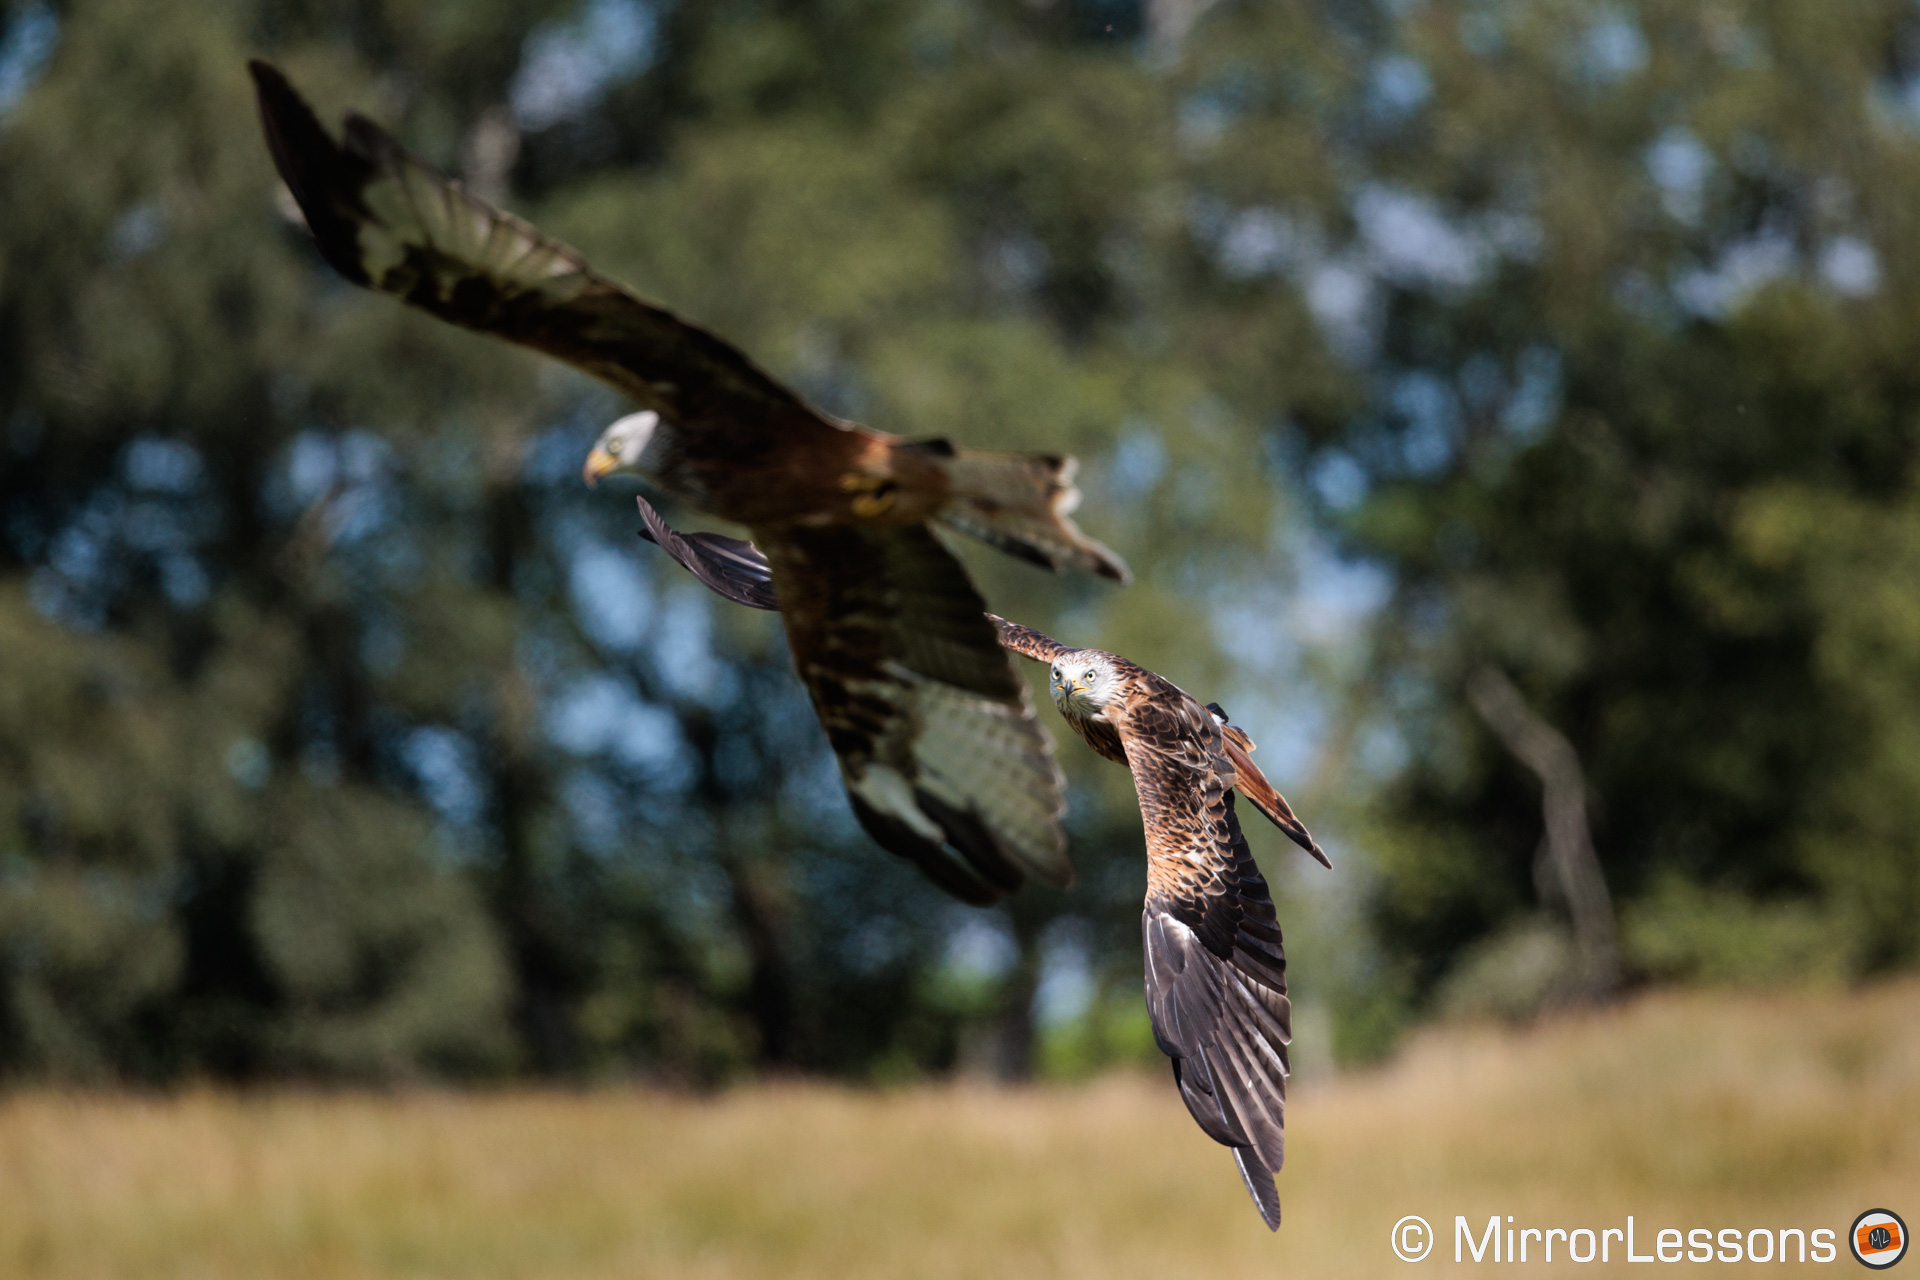 two red kites flying against trees